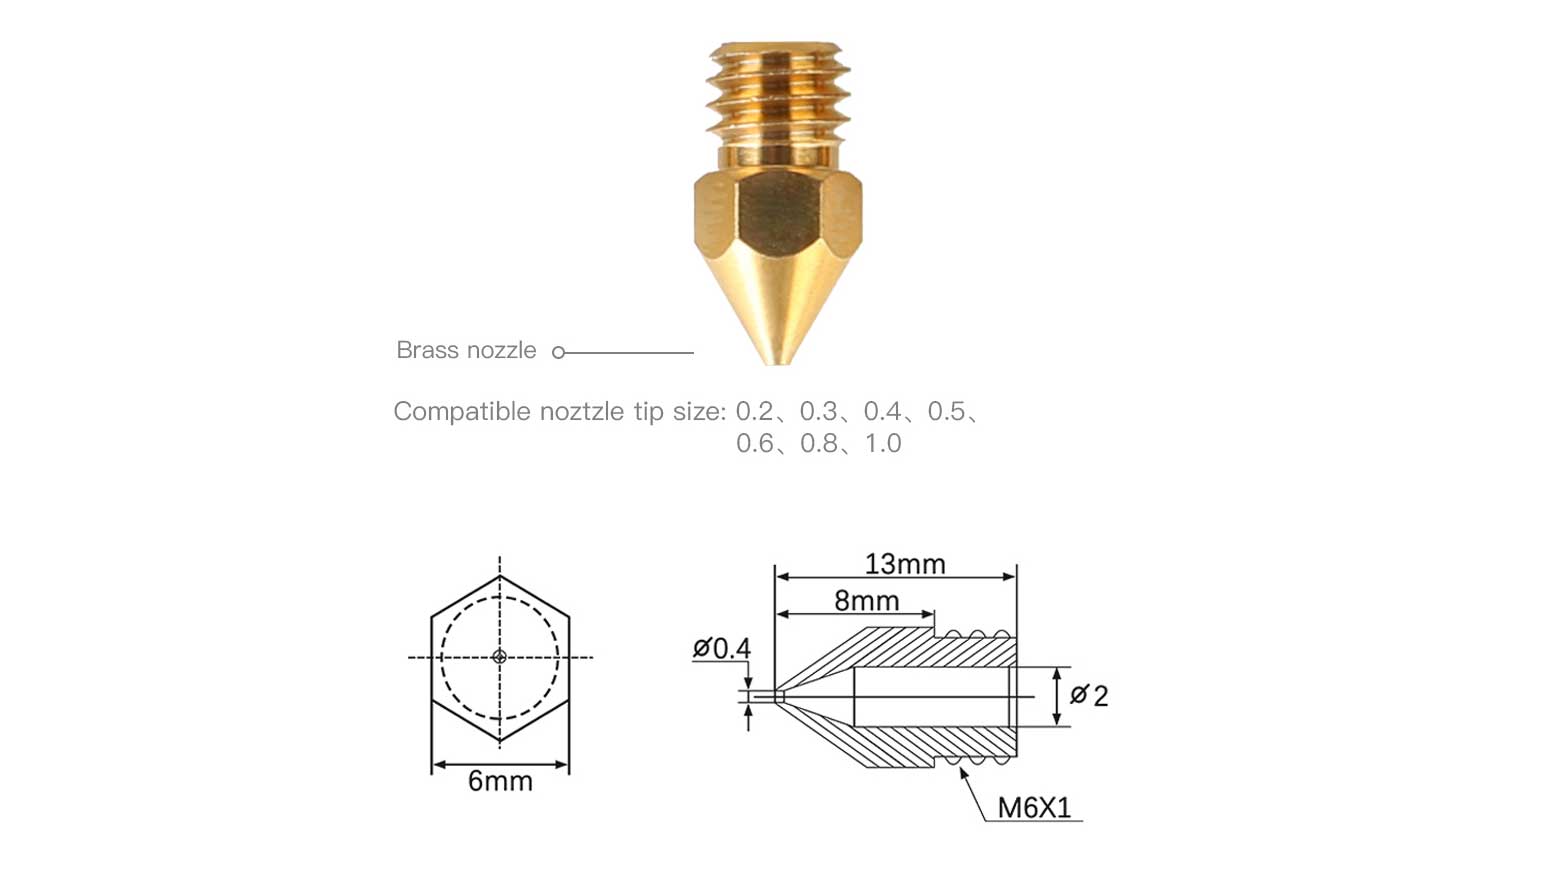 creality brass nozzles variety pack dimensioned drawing